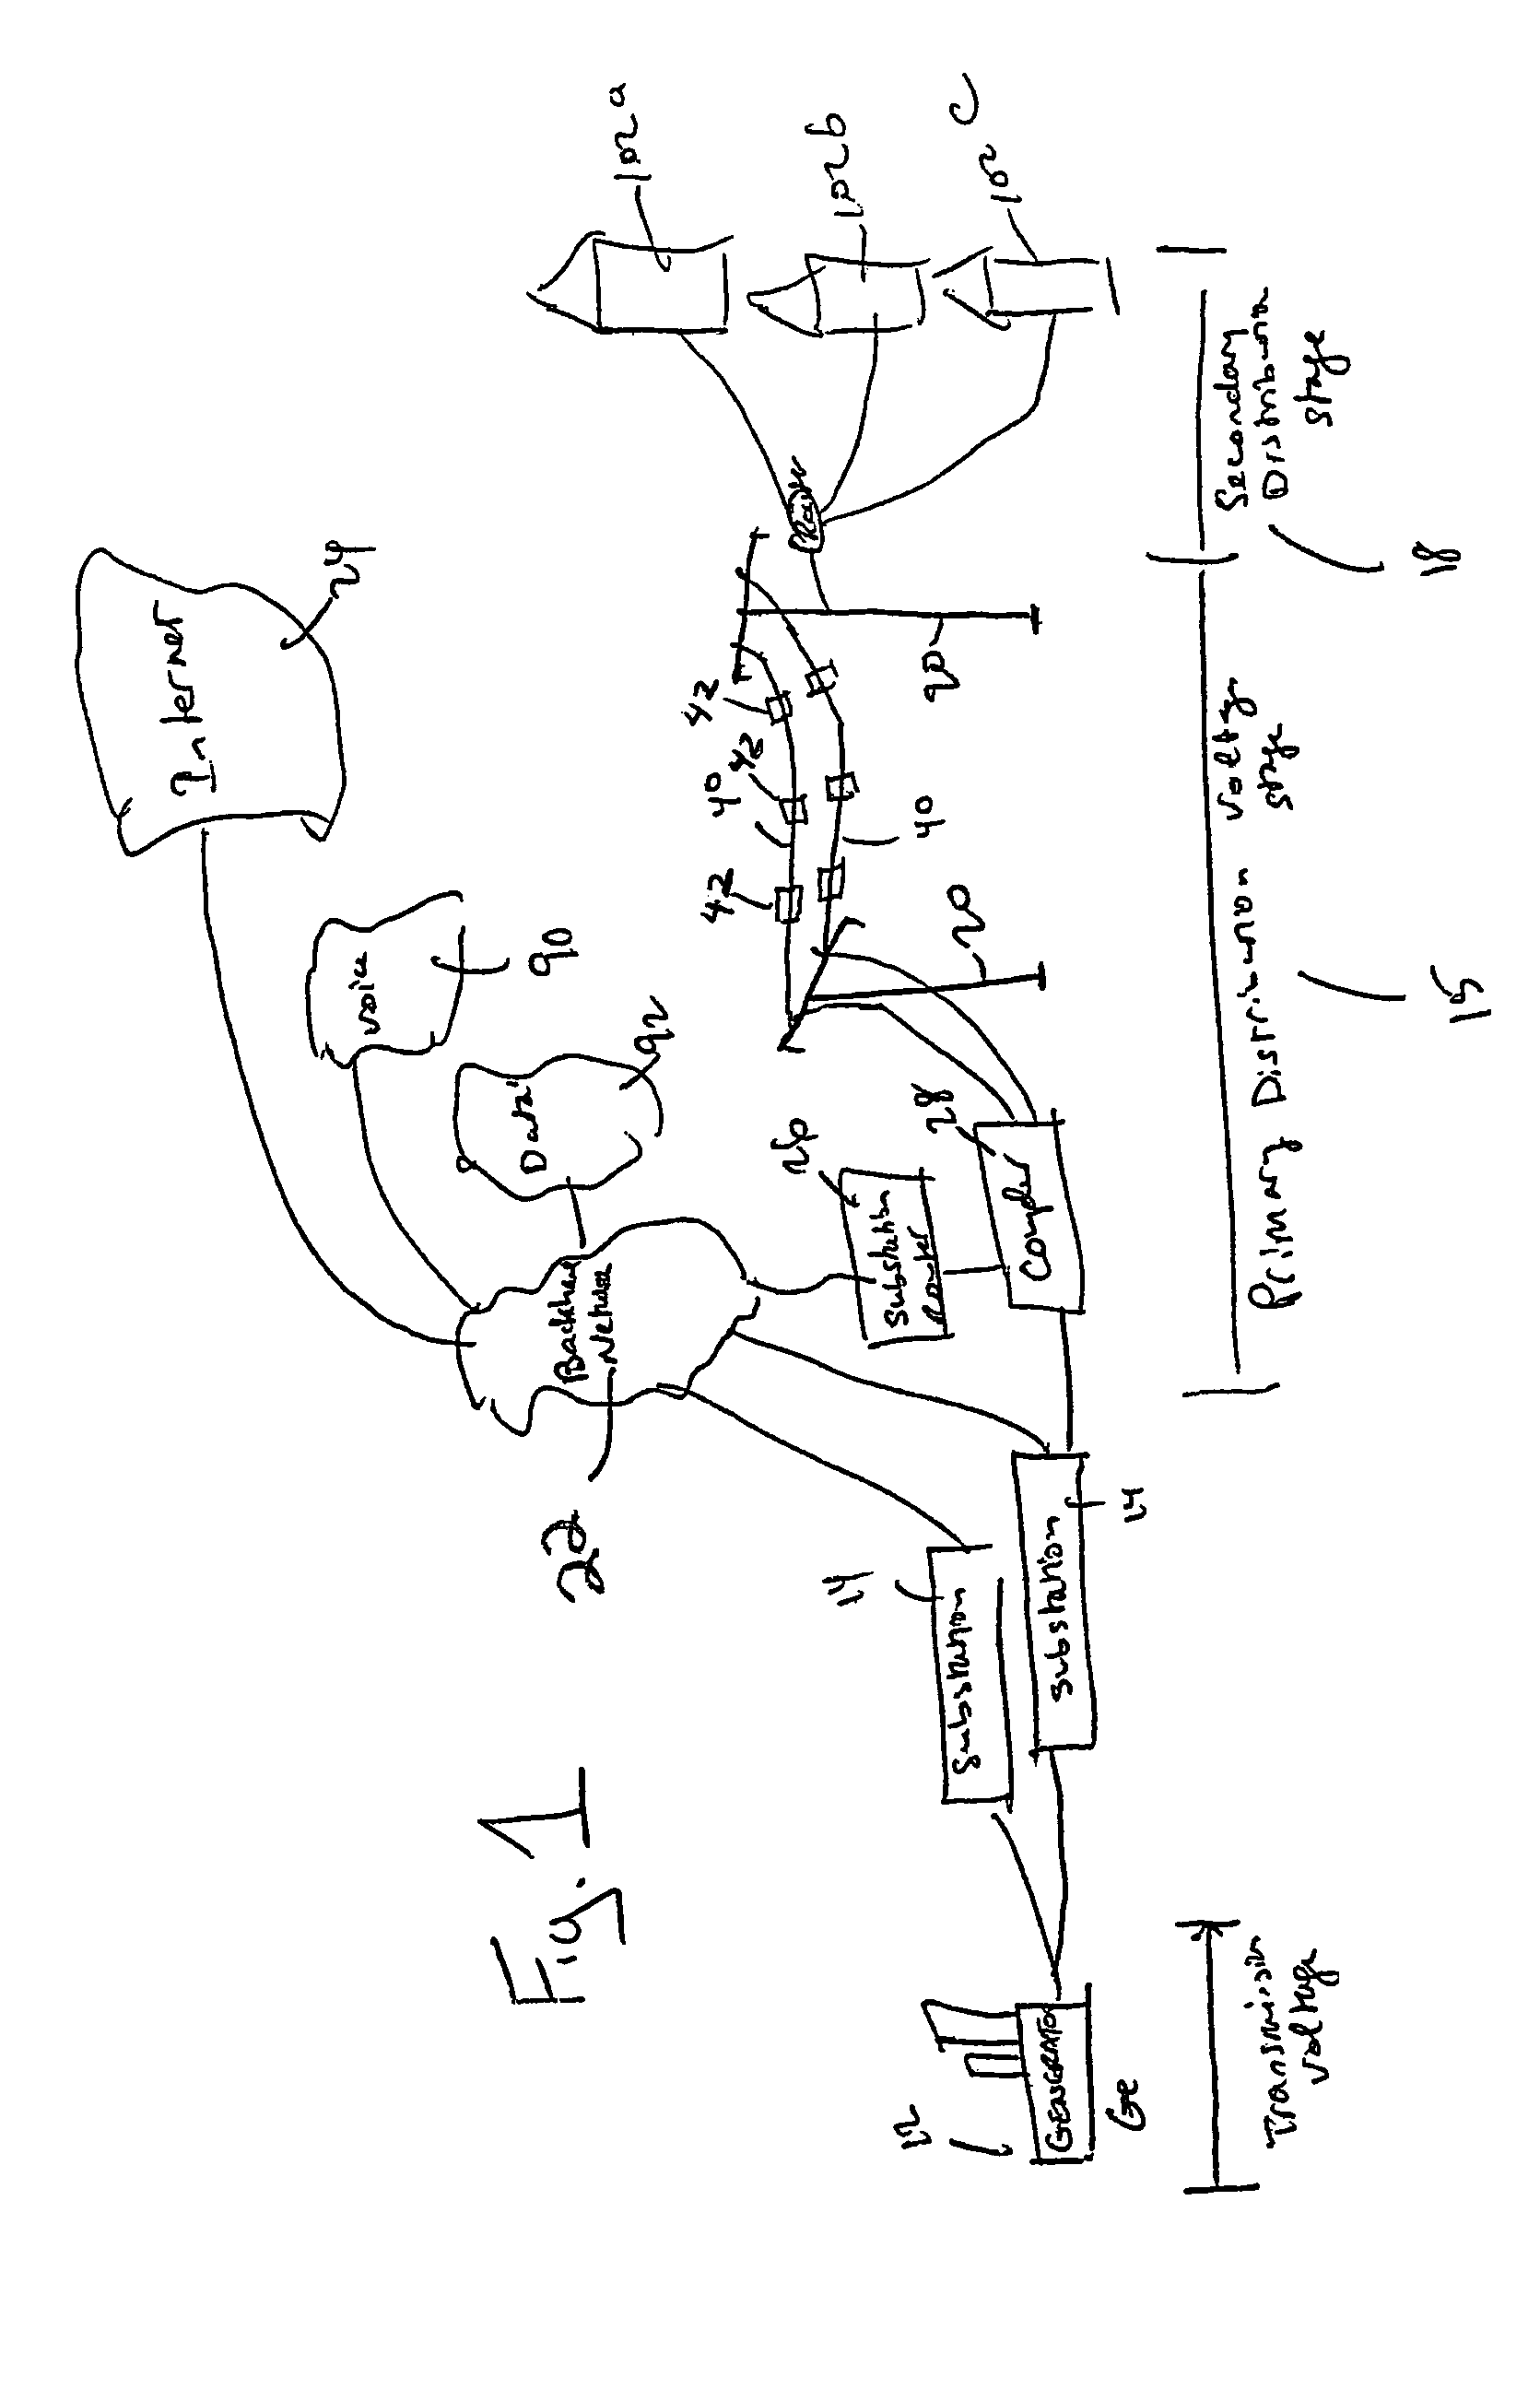 System and method for distributing broadband communication signals over power lines